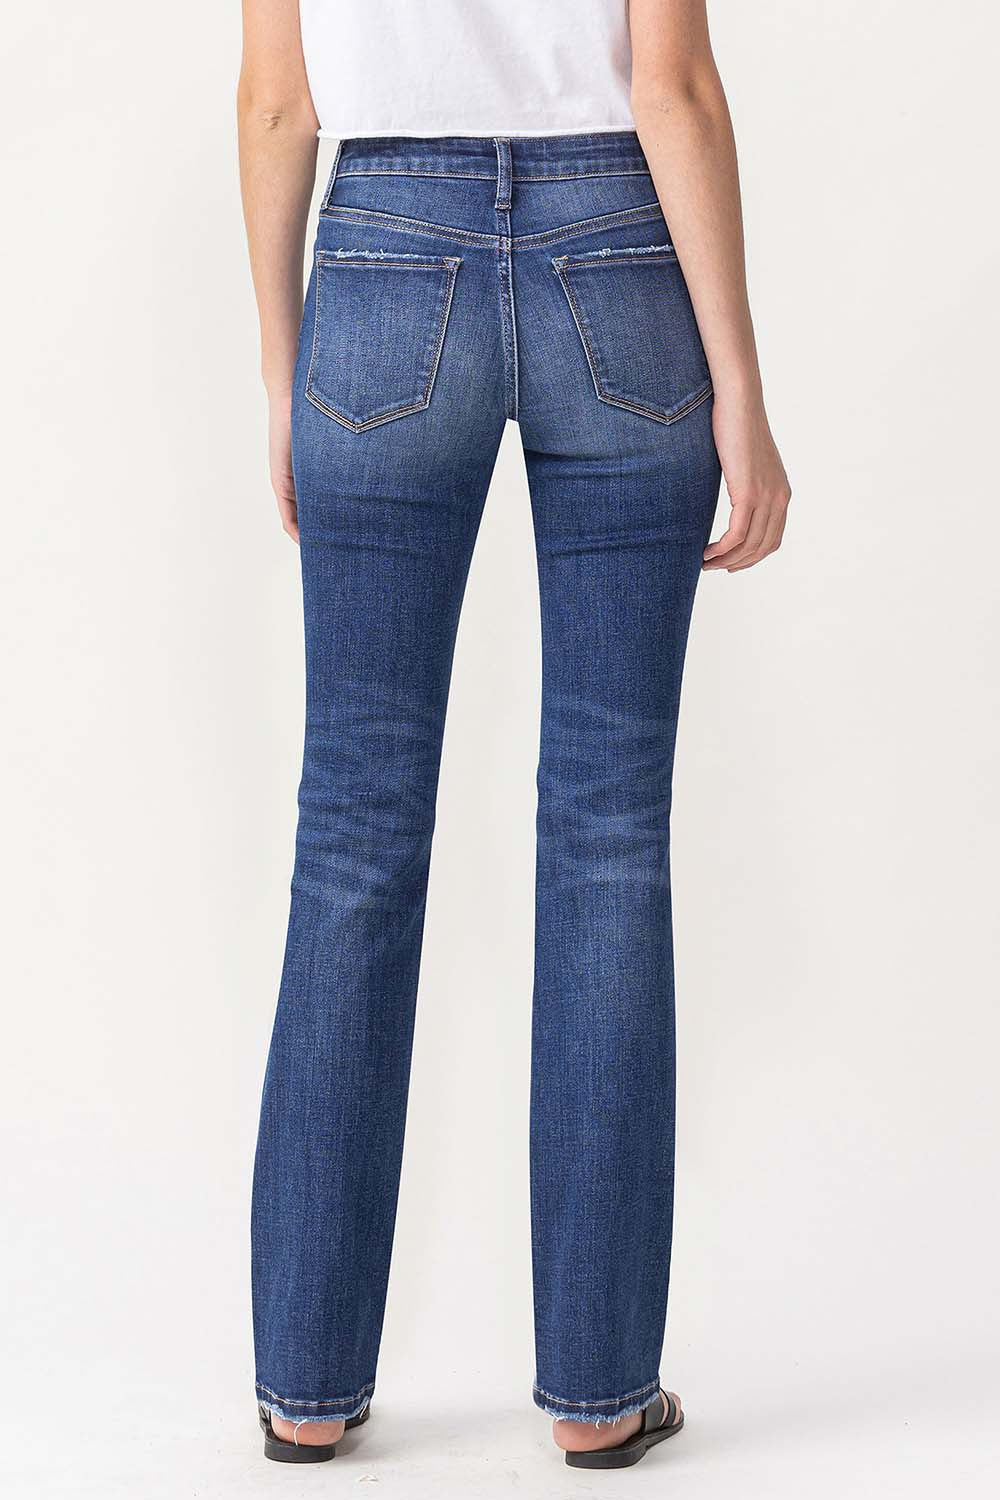 By All Means Bootcut Jeans By Lovervet